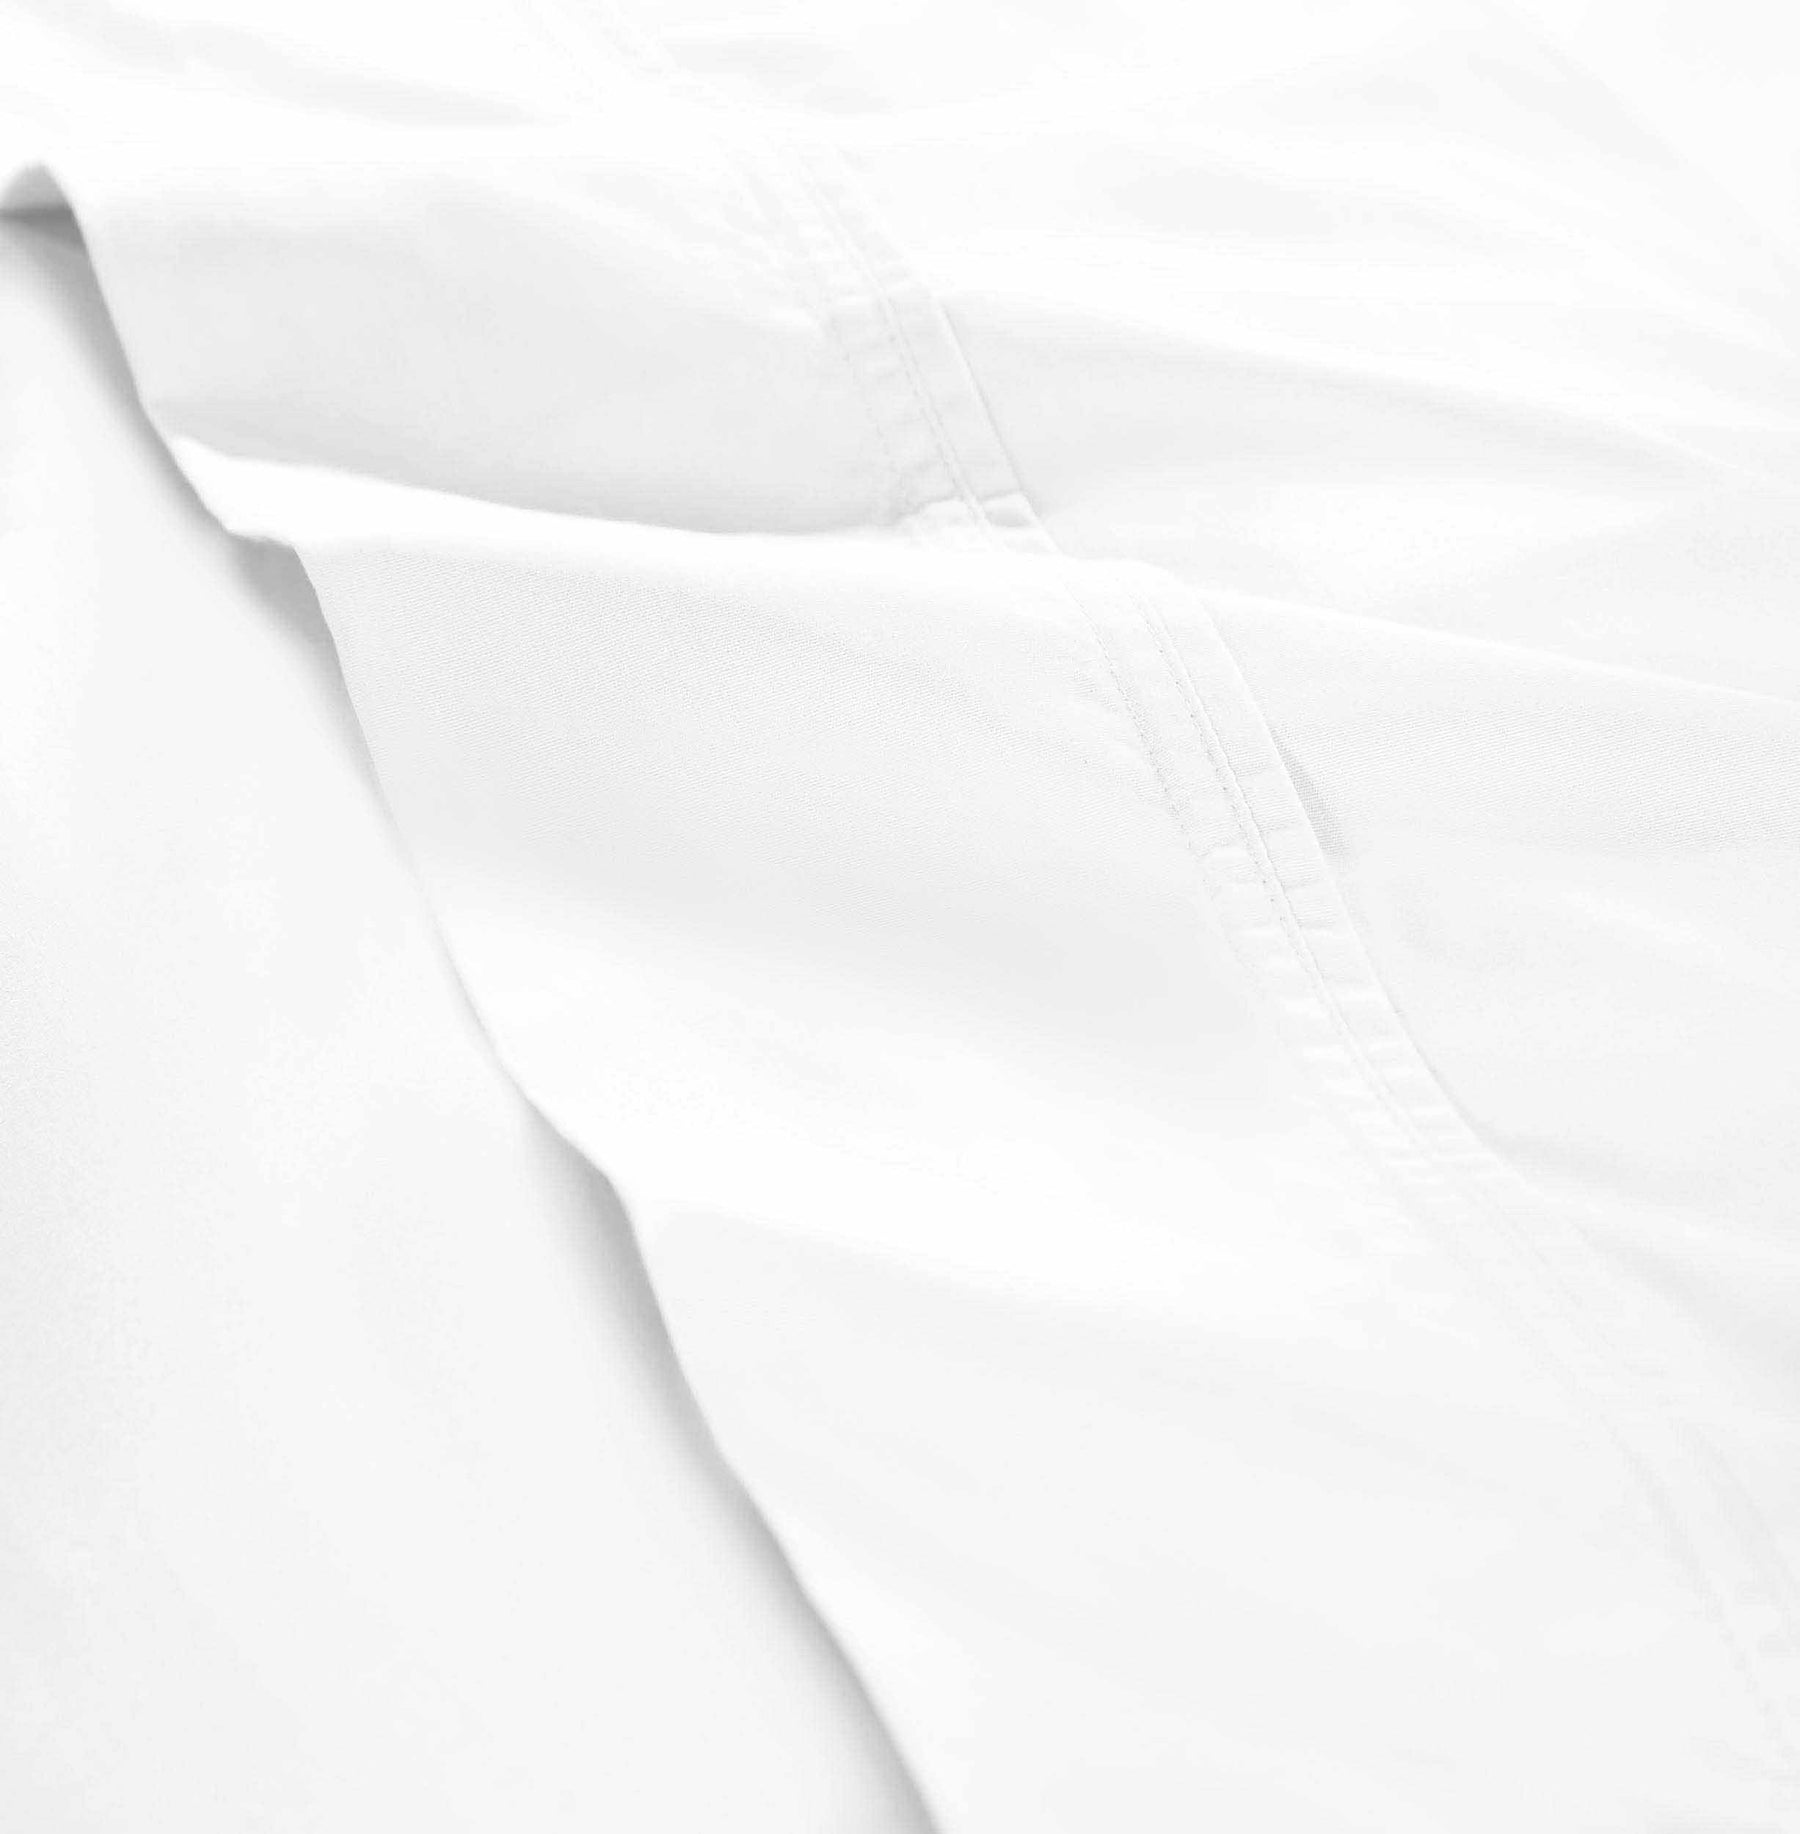 Organic Cotton 300 Thread Count Percale Deep Pocket Fitted Bed Sheet-White